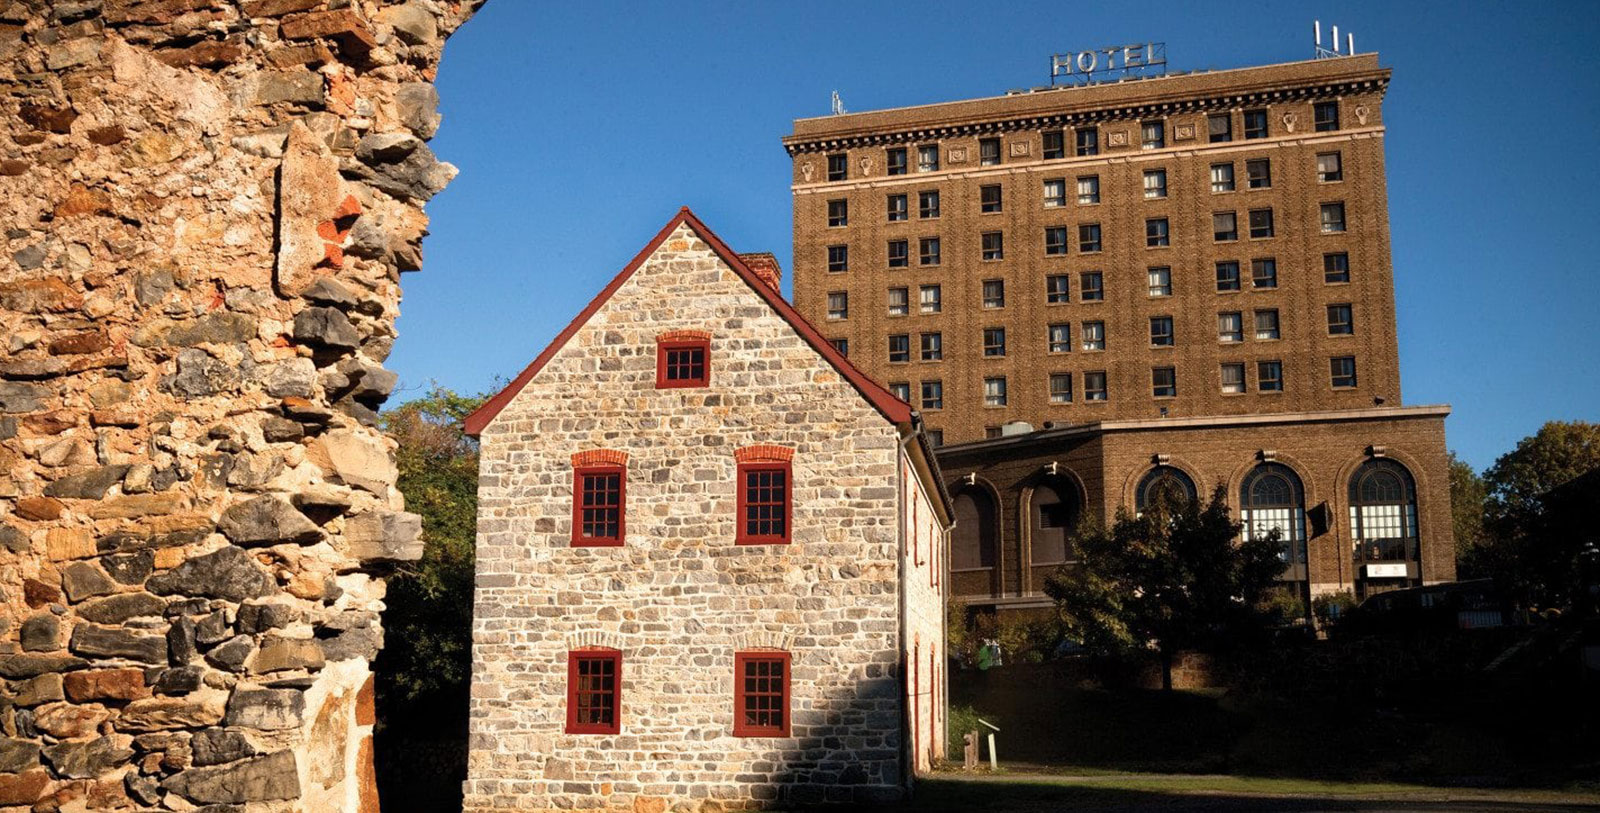 Explore the Colonial Industrial Quarter, the Moravian Museum of Bethlehem, and the Kemerer Museum of Decorative Arts steps away.